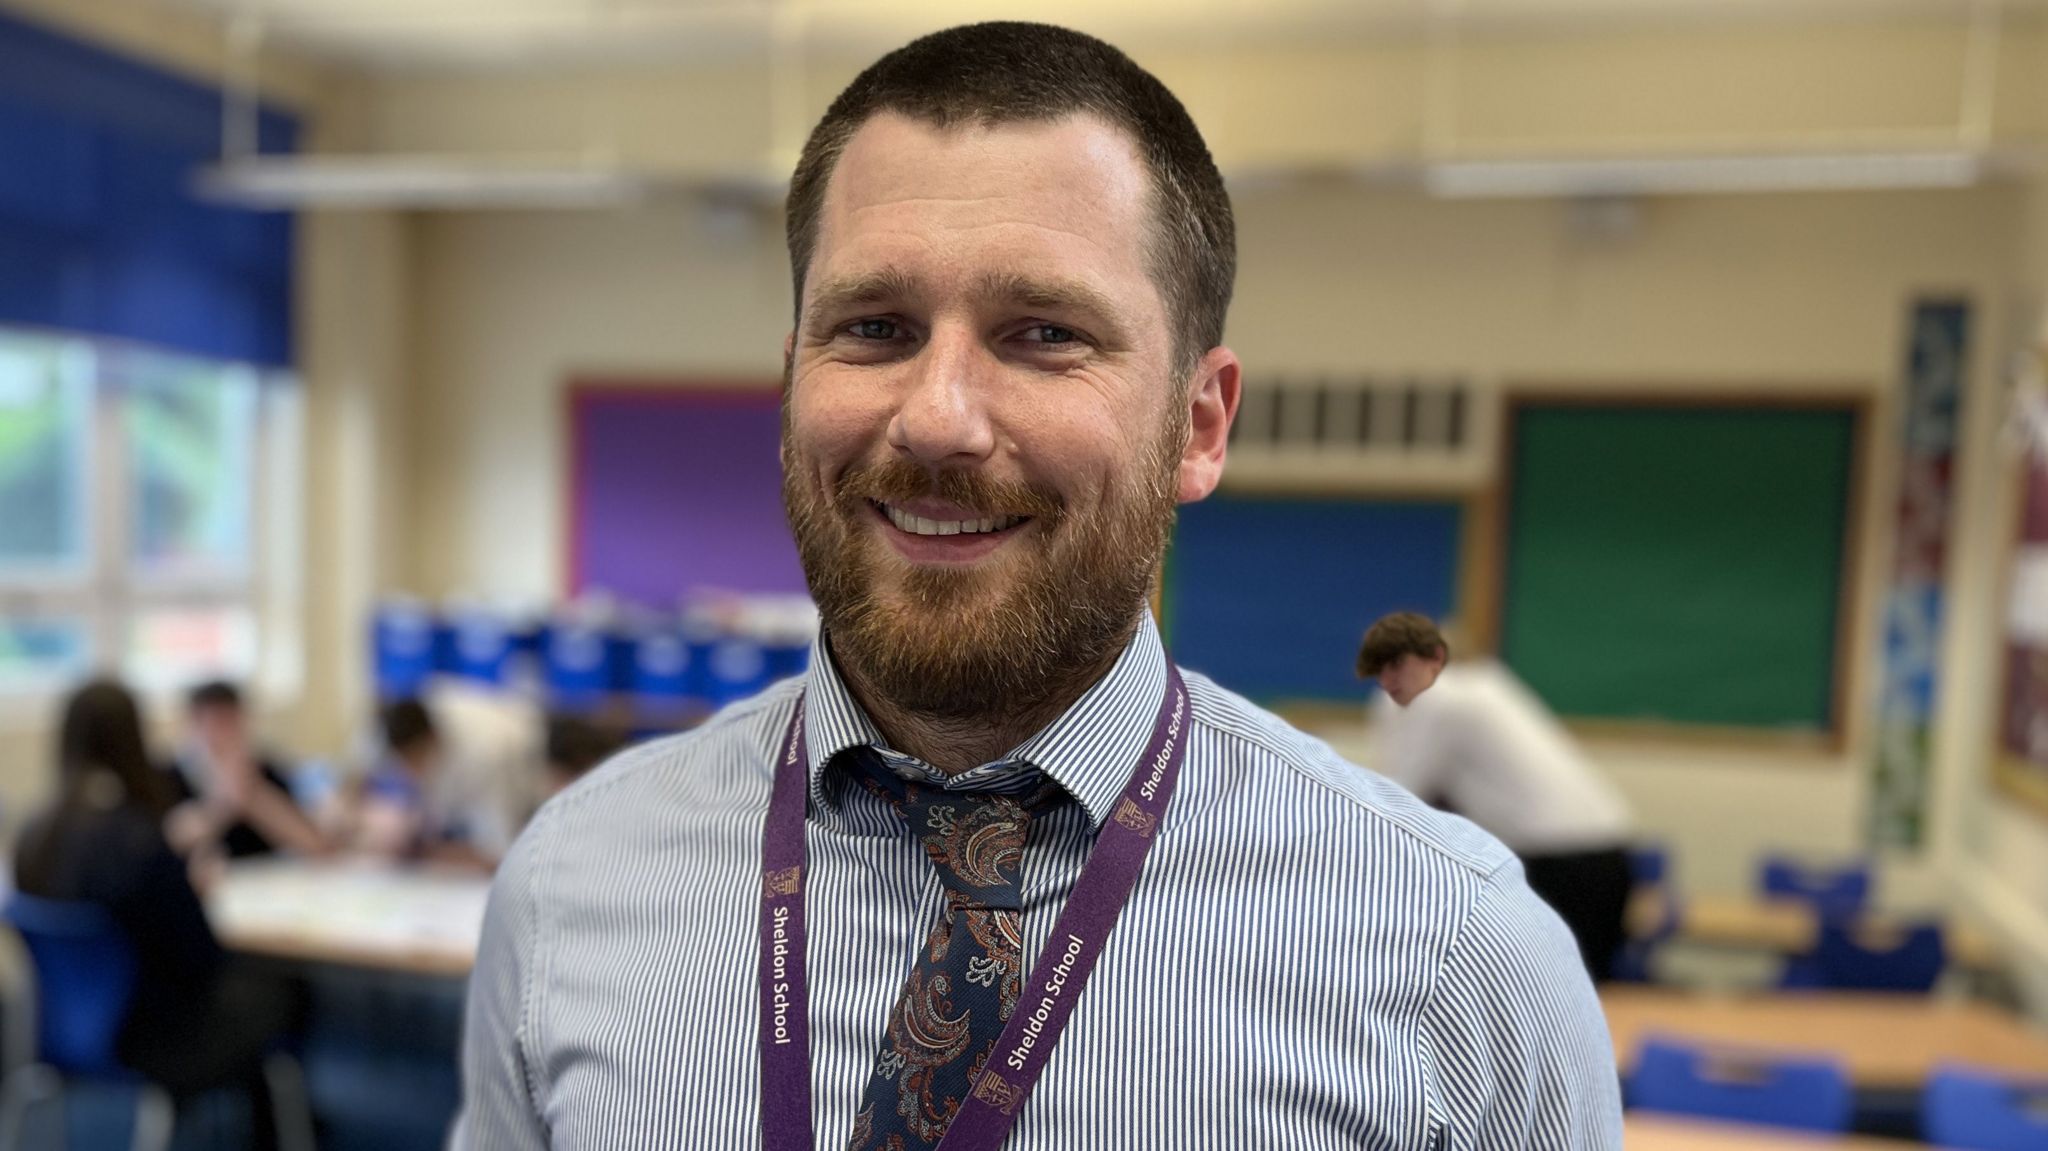 Teacher, Richard Page, with short brown hair and bears, a blue striped shirt and multi-coloured tie - smiling